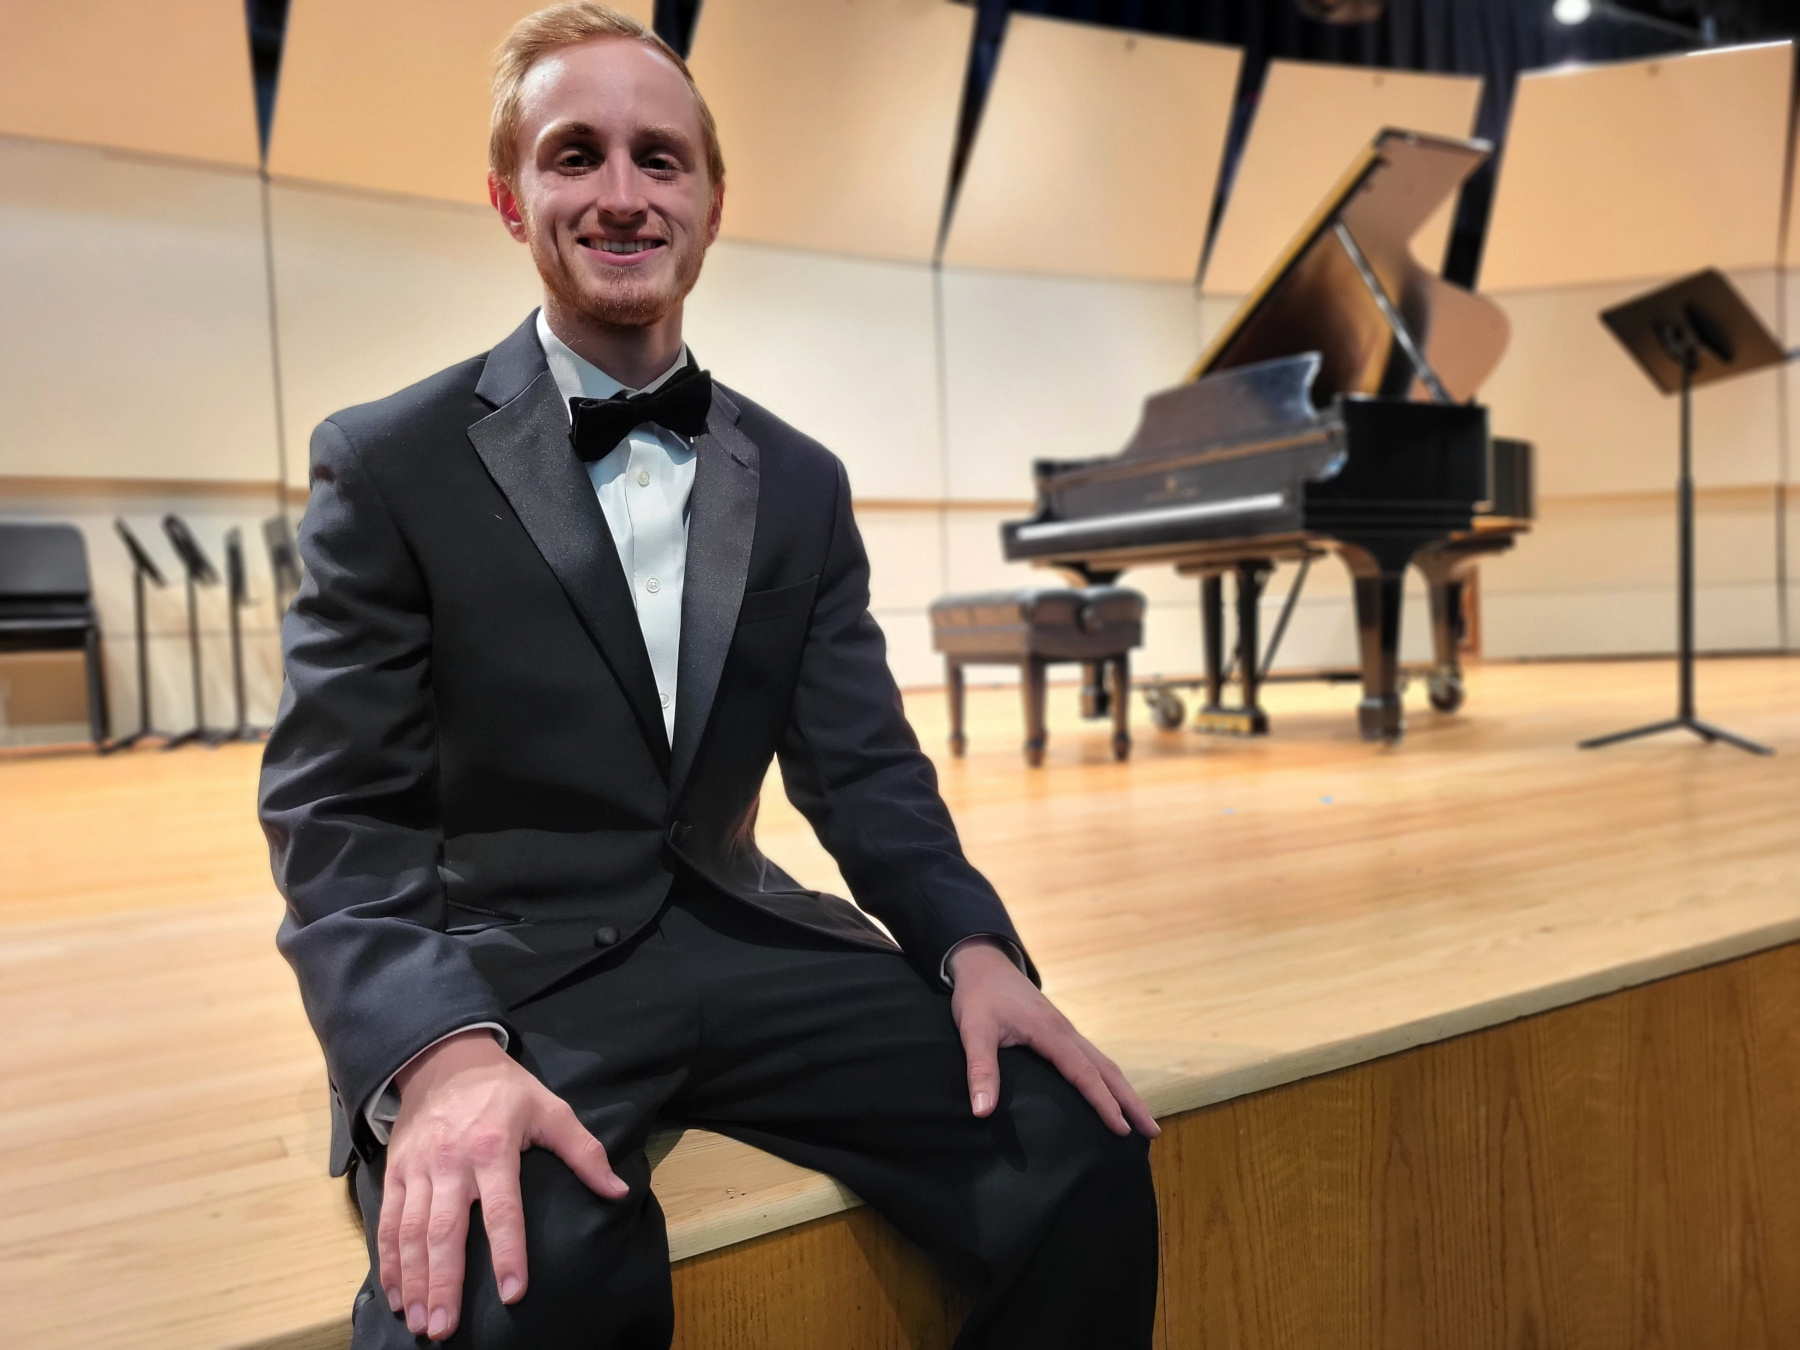 Will Jelstrom wearing tuxedo, sitting on stage in Taylor Auditorium